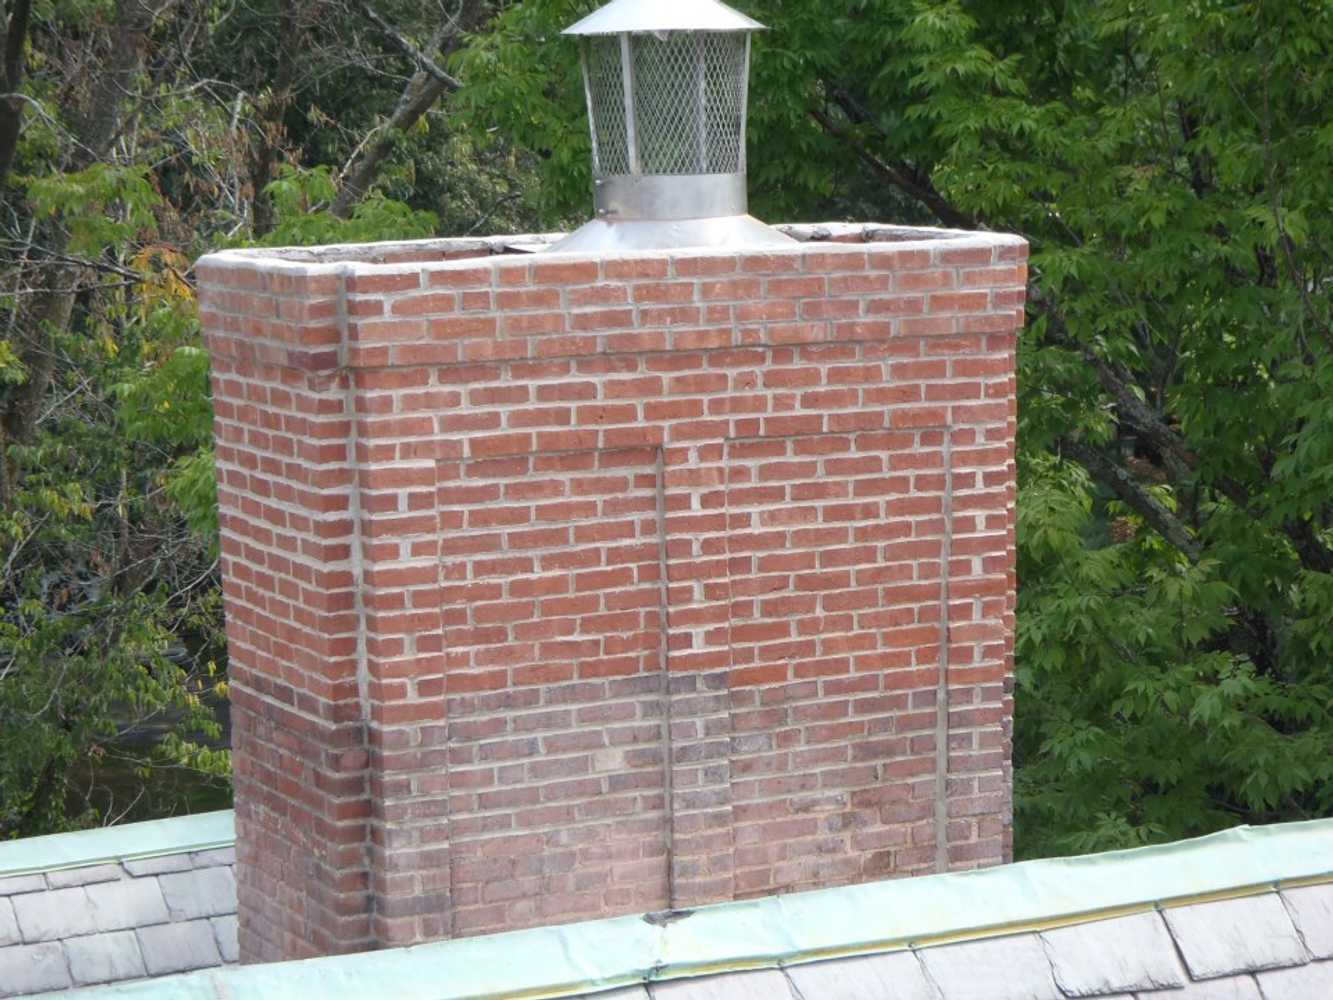 Chimney Images and more..